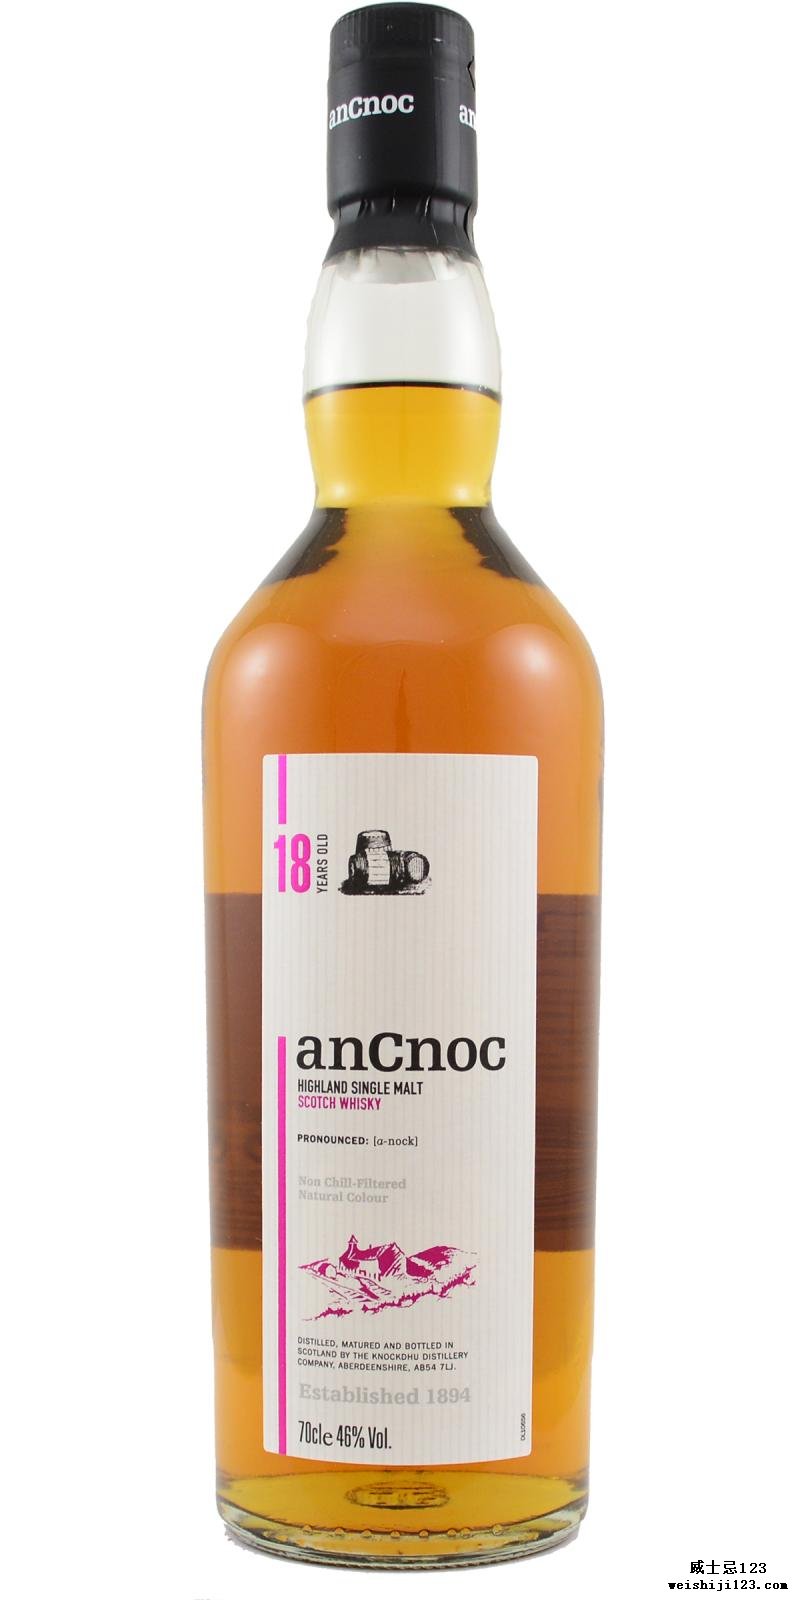 An Cnoc 18-year-old